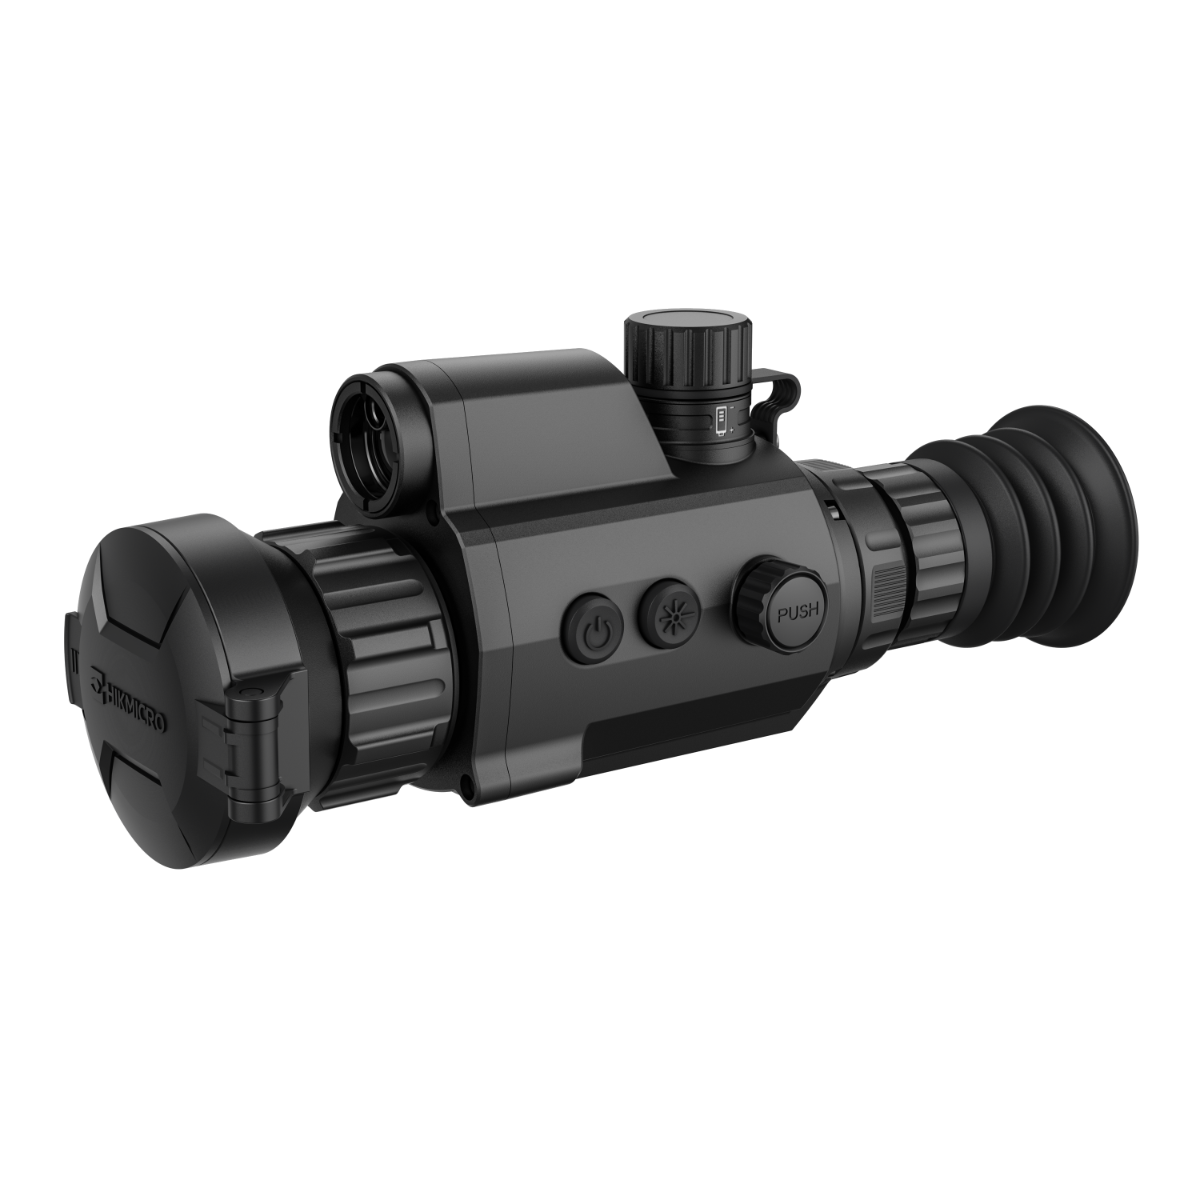 HIKMICRO PANTHER PRO 2.0 50mm 640px THERMAL RIFLESCOPE LRF PQ50L2.0